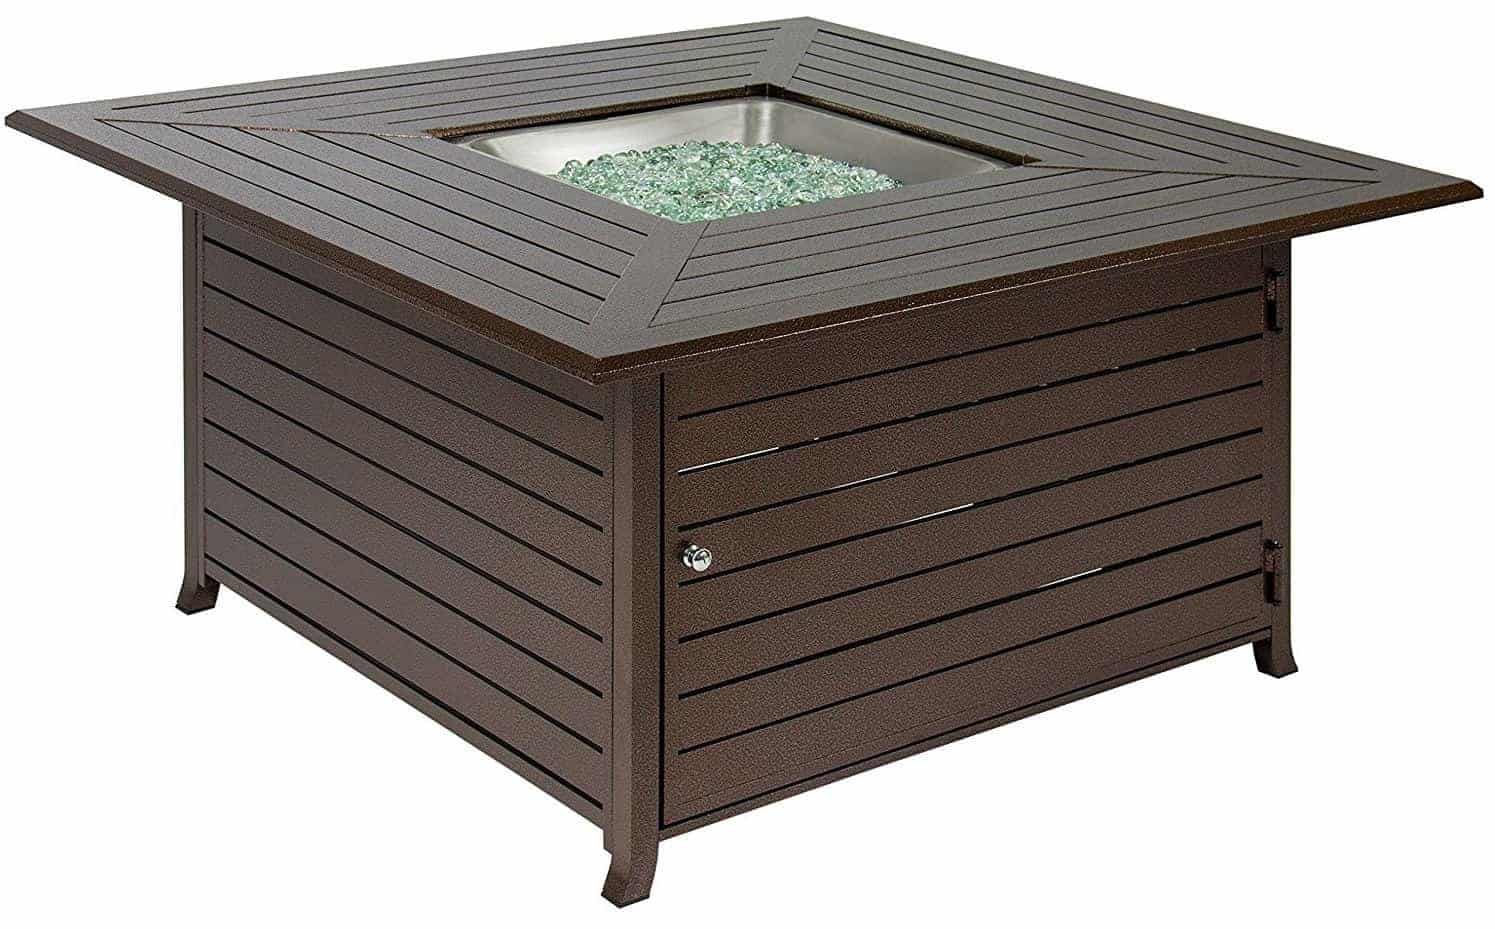 BCP Extruded Aluminum Gas Outdoor Fire Pit Table with Cover